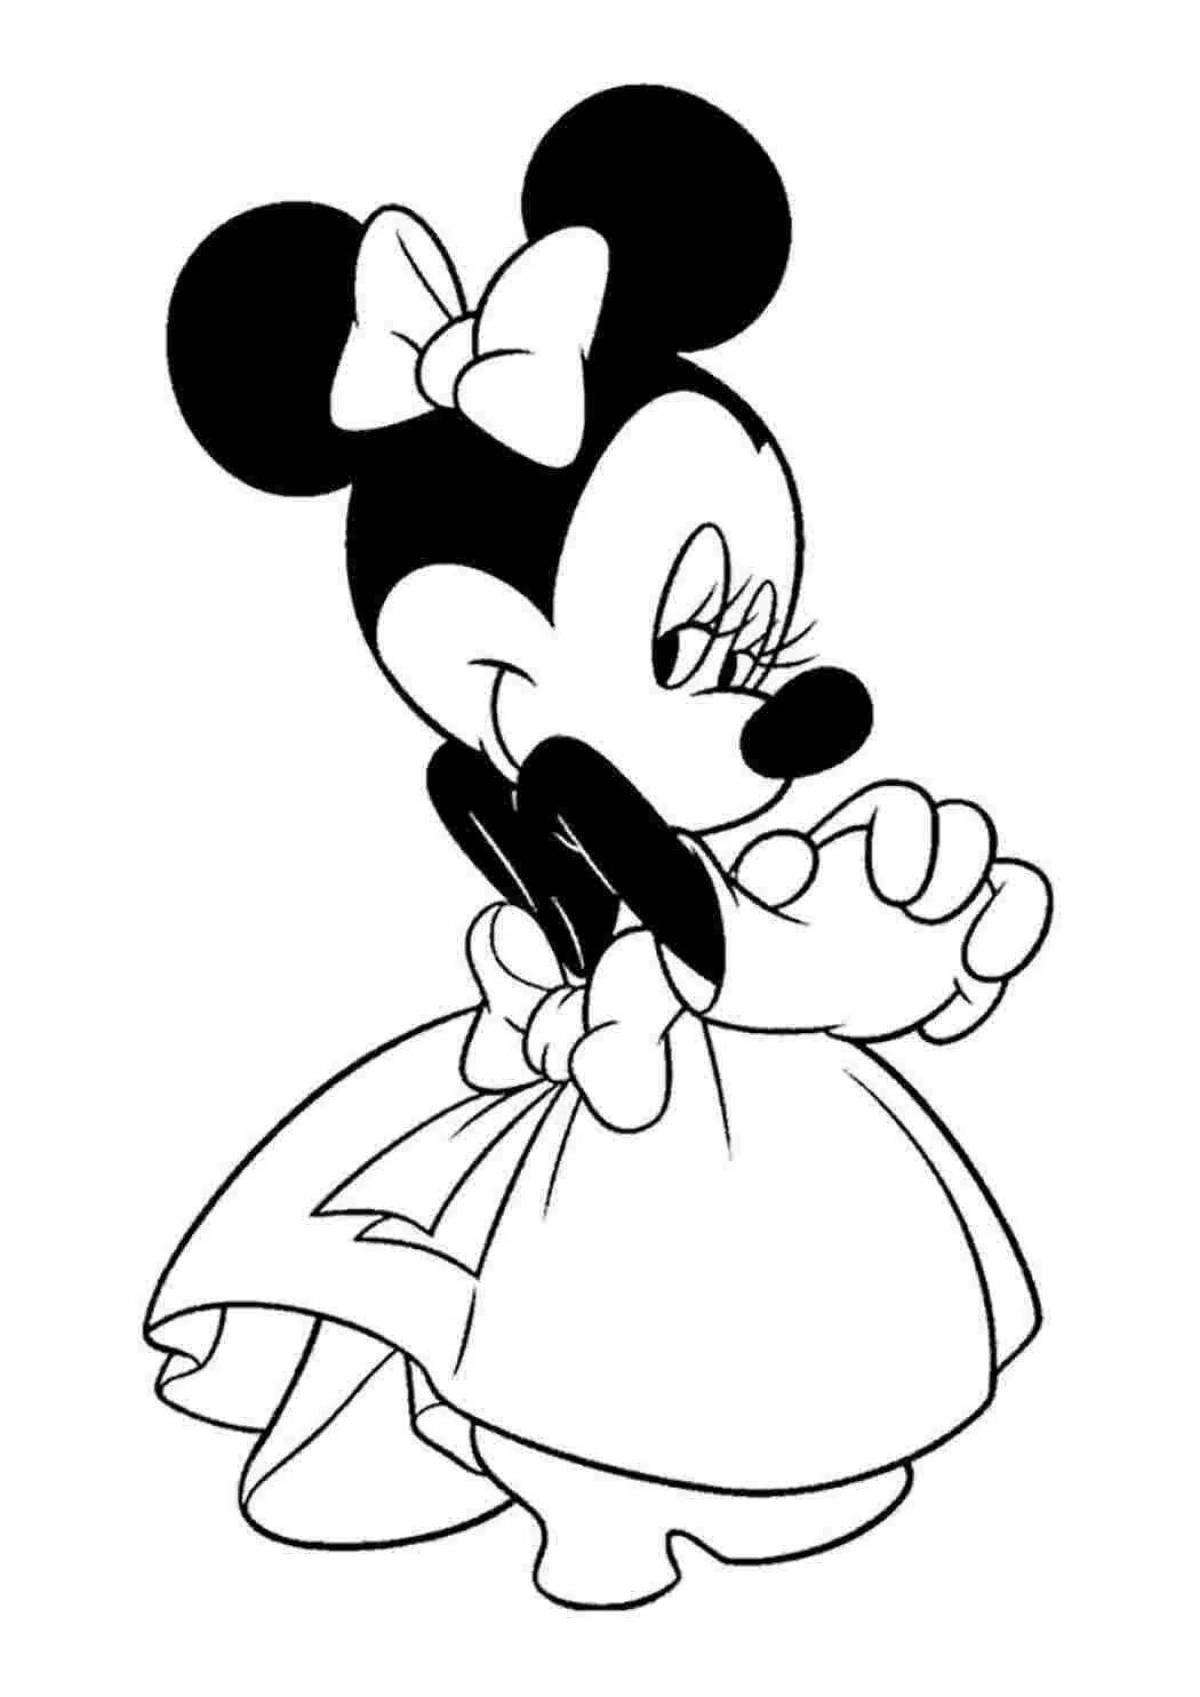 Minnie mouse quirky coloring book